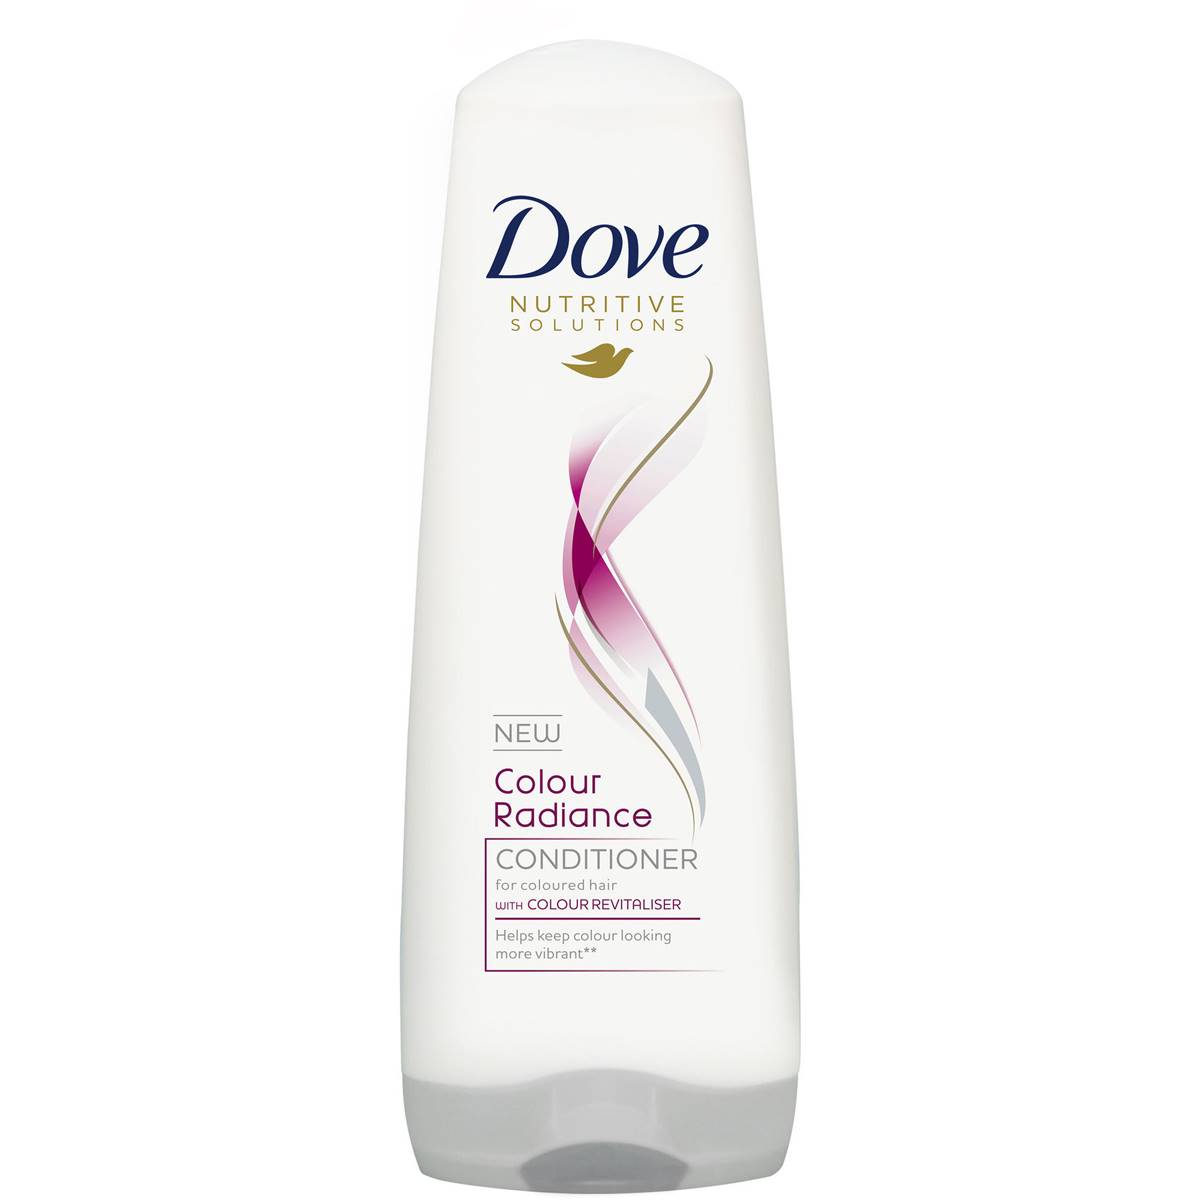 Dove Nutritive Solutions Conditioner Colour Radiance